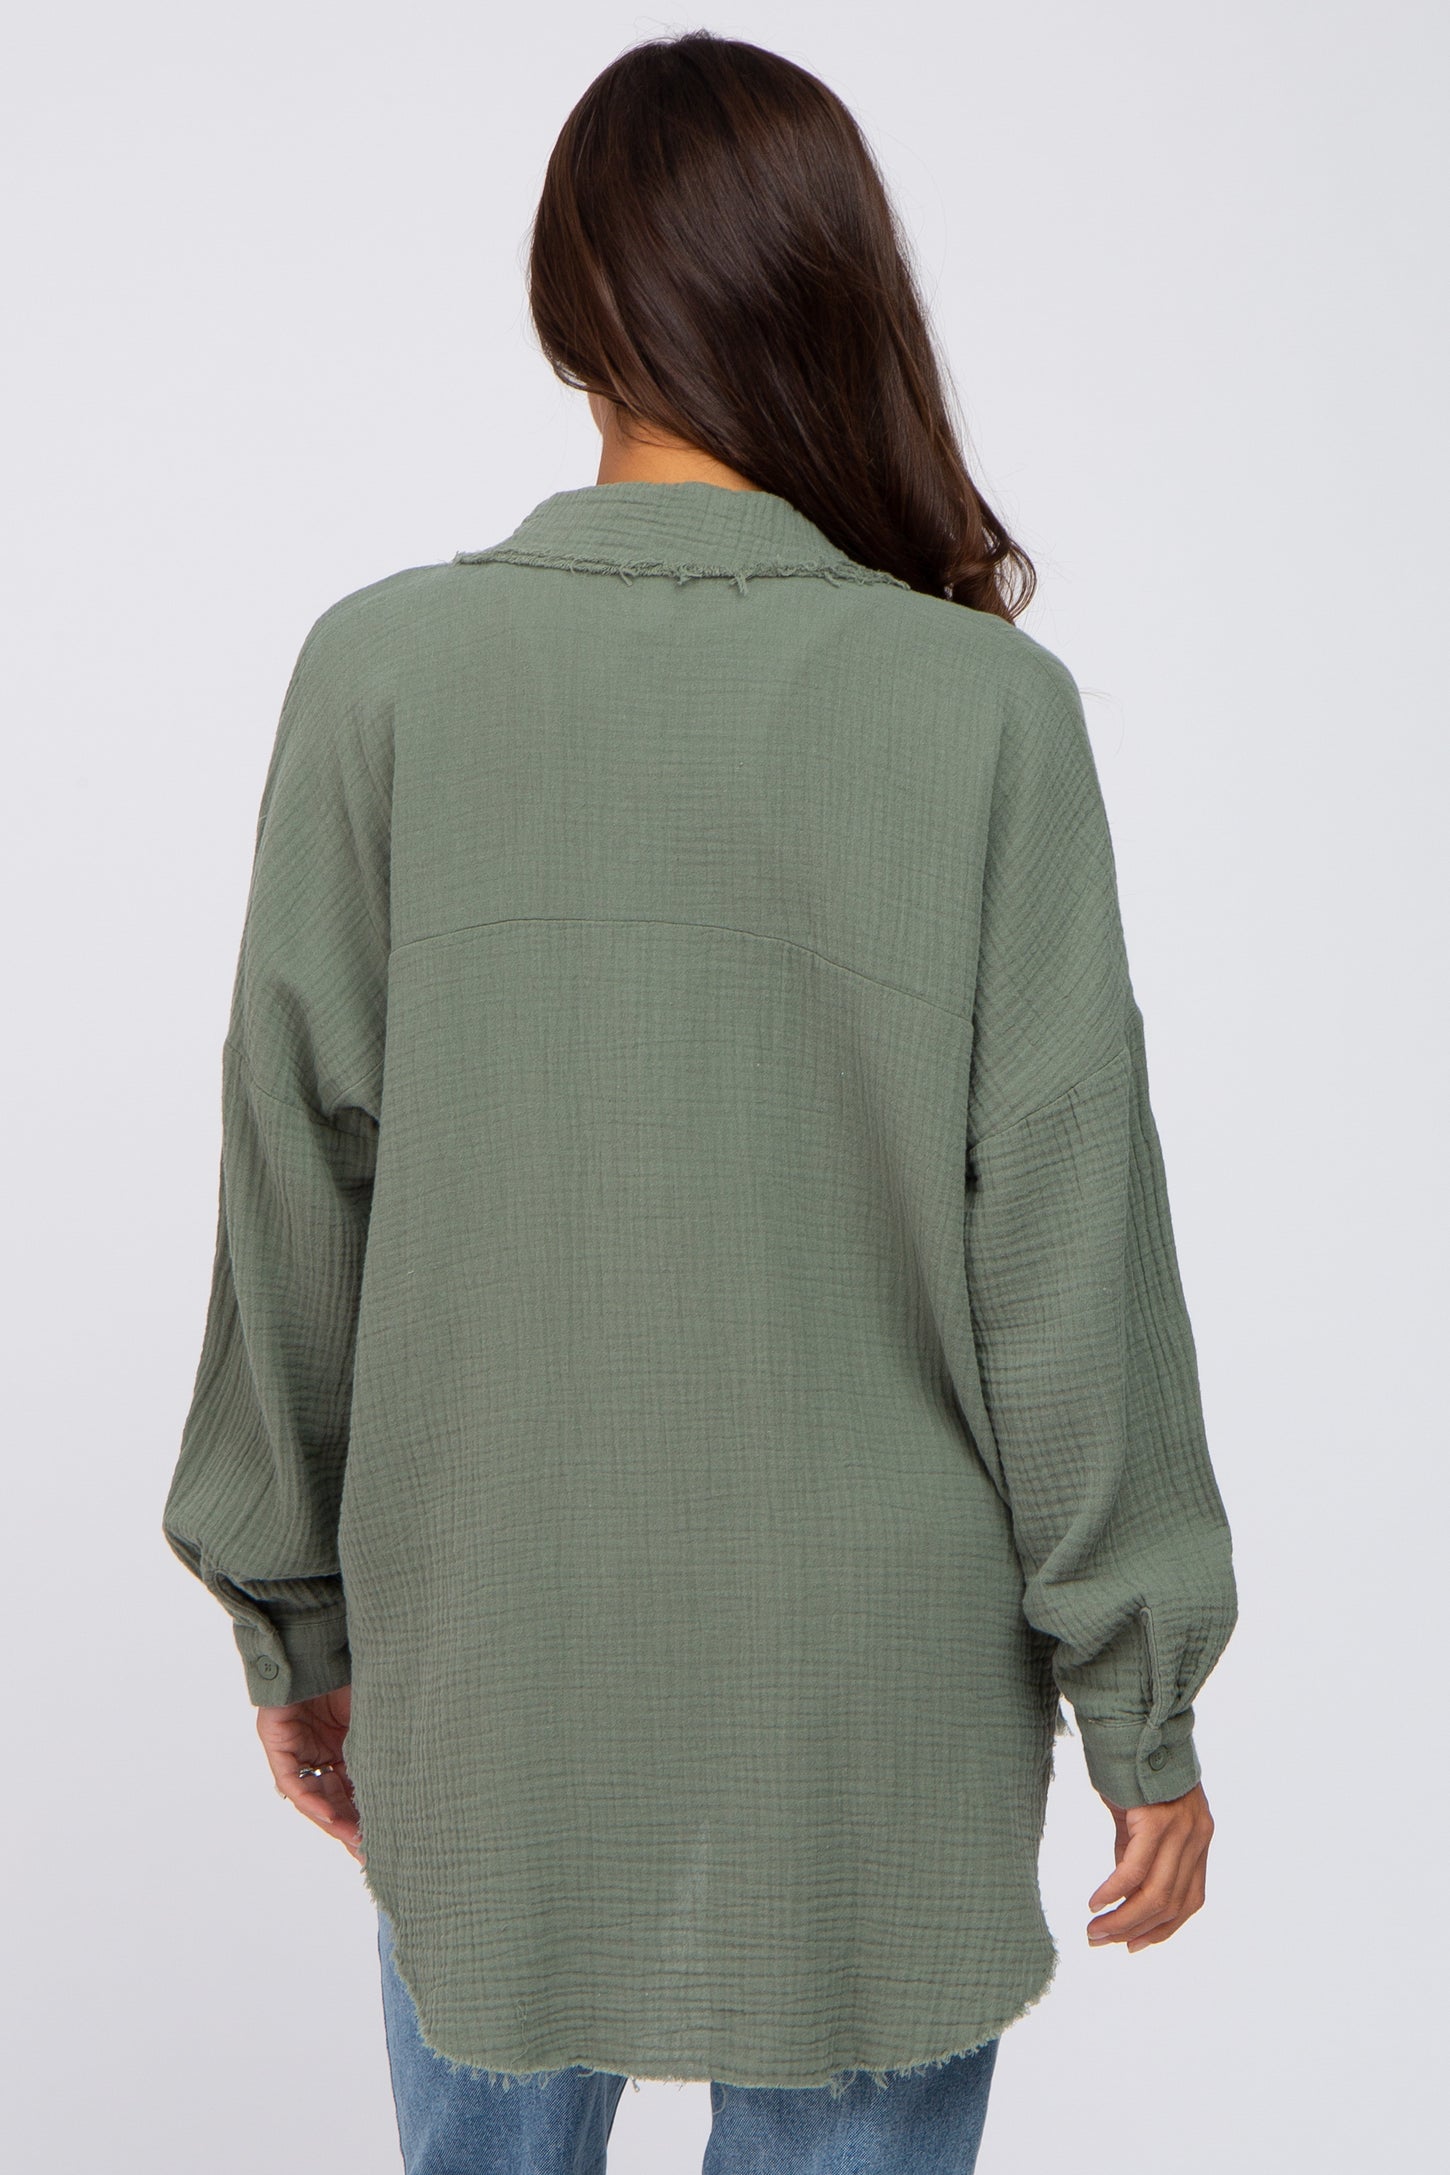 Olive Crepe Maternity Button Up Shirt